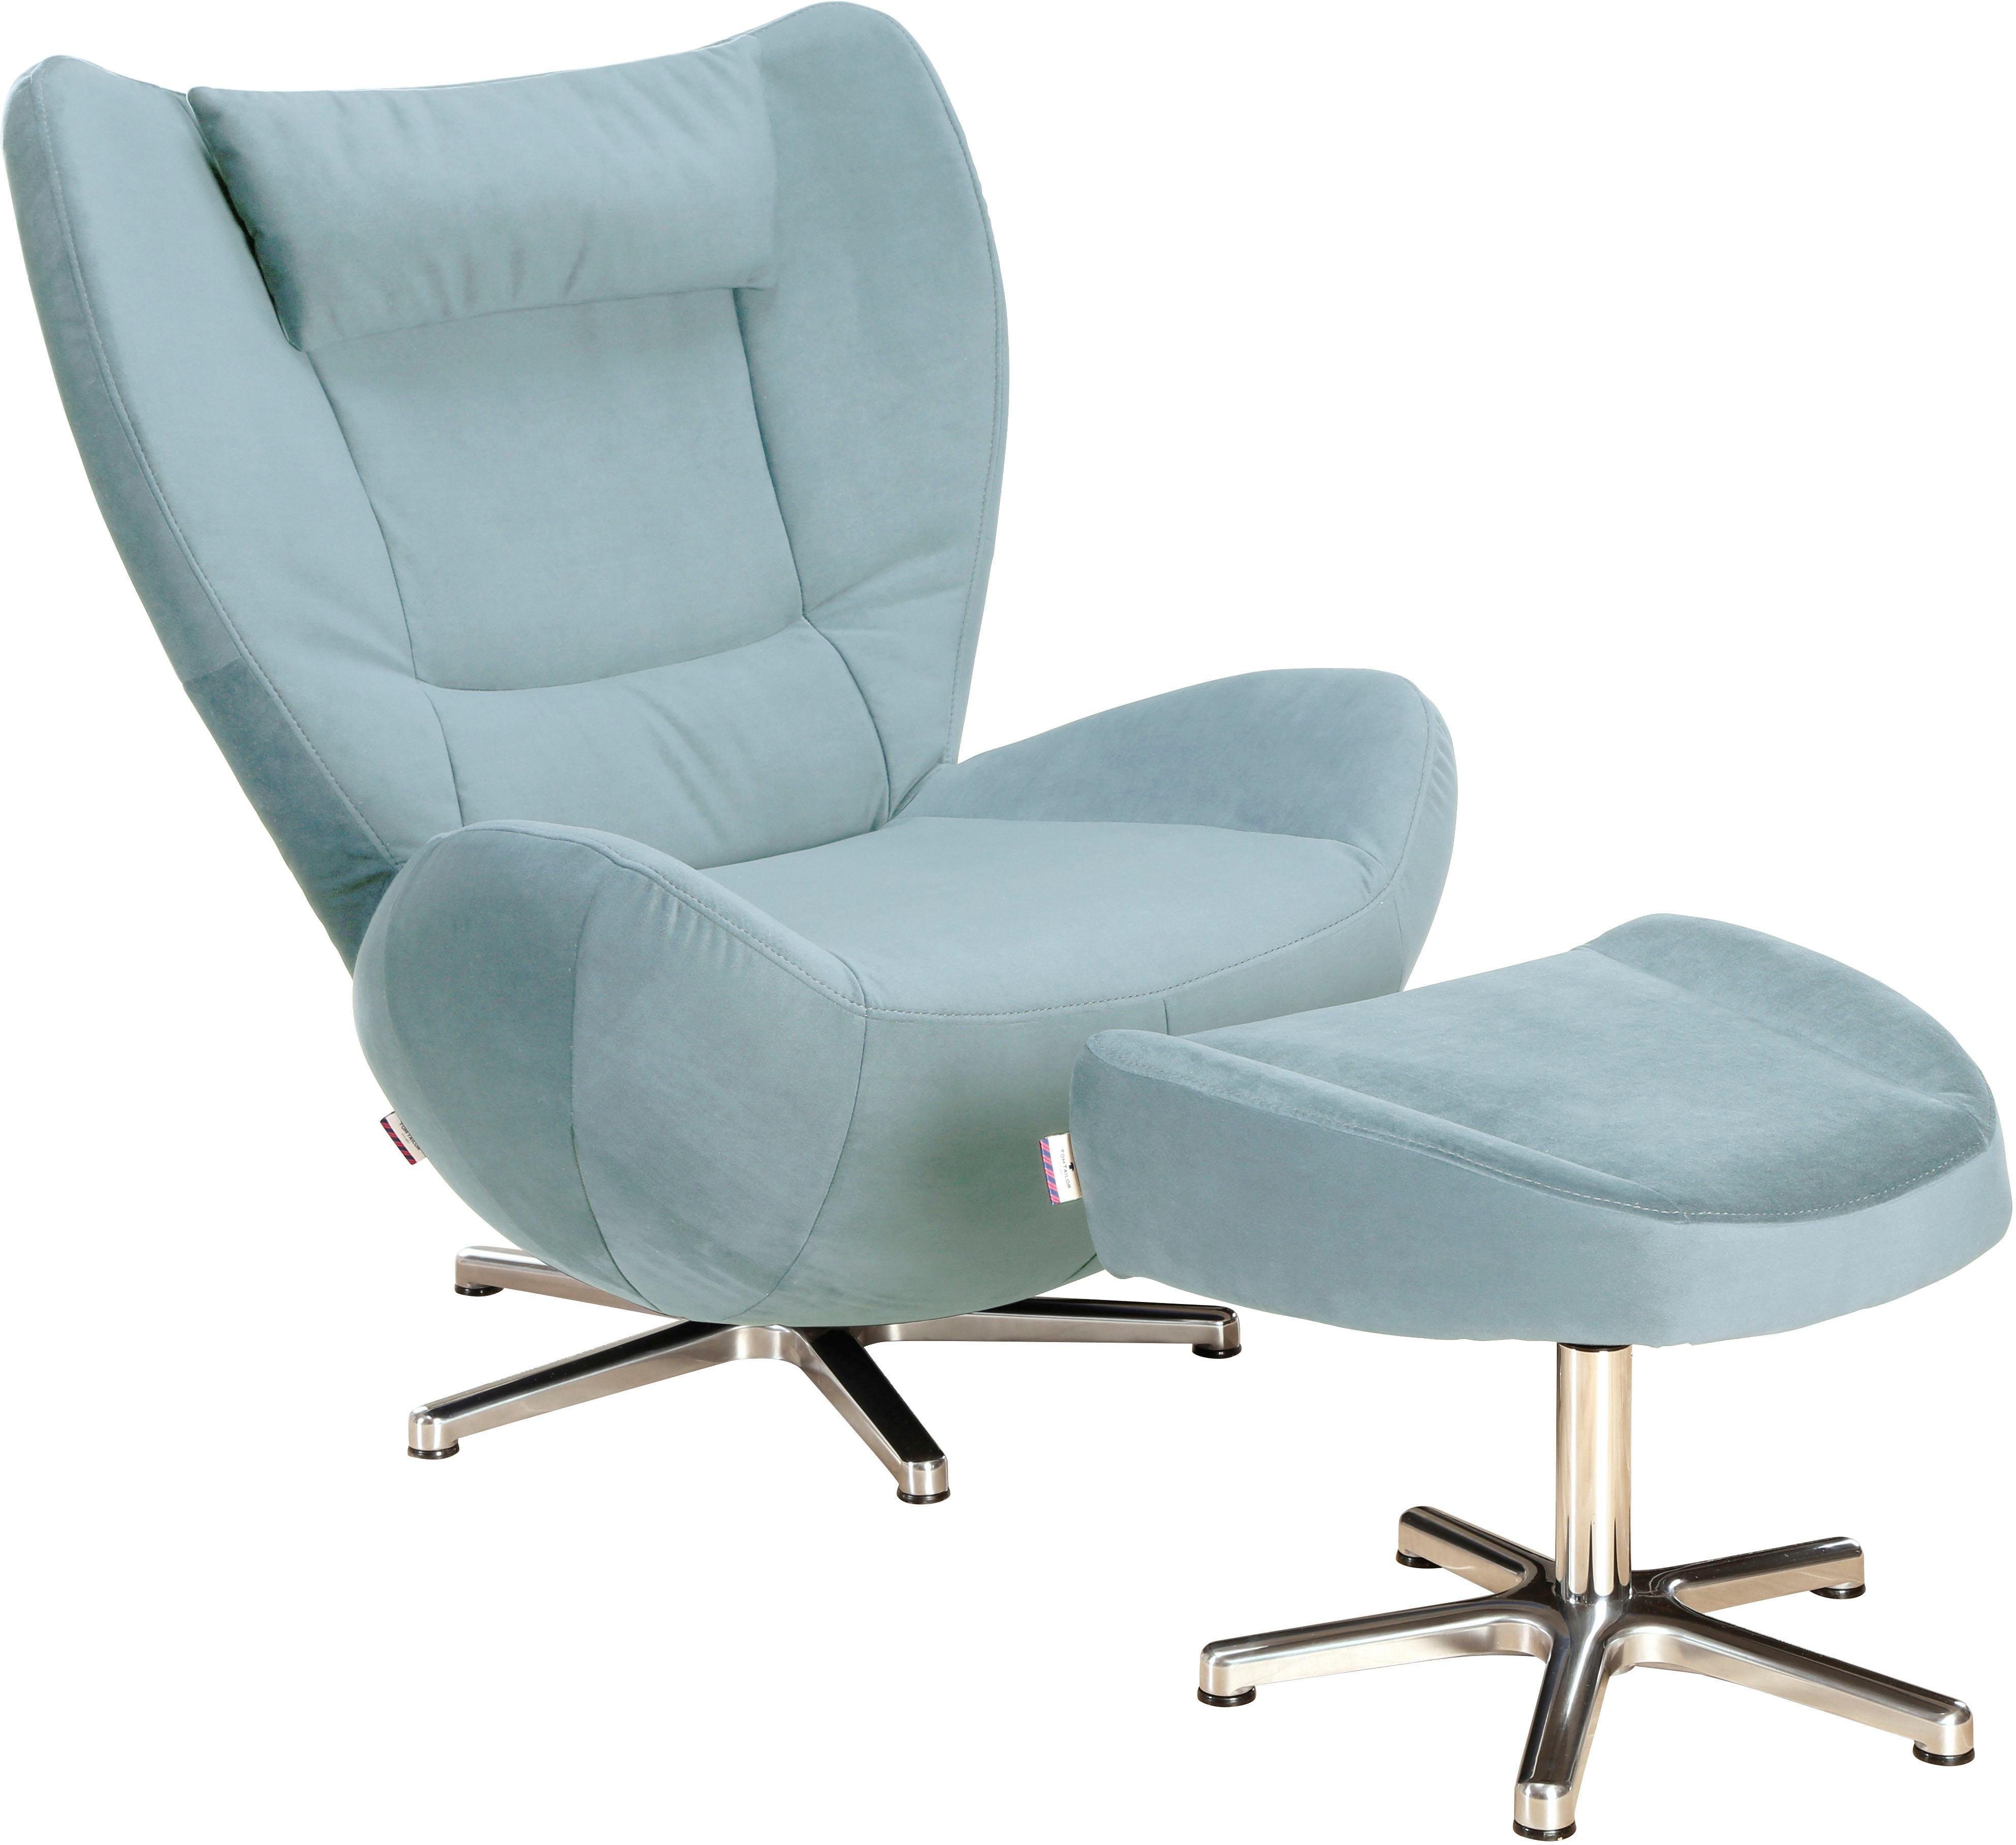 PURE, TOM TOM TAILOR Loungesessel mit HOME Chrom Metall-Drehfuß in